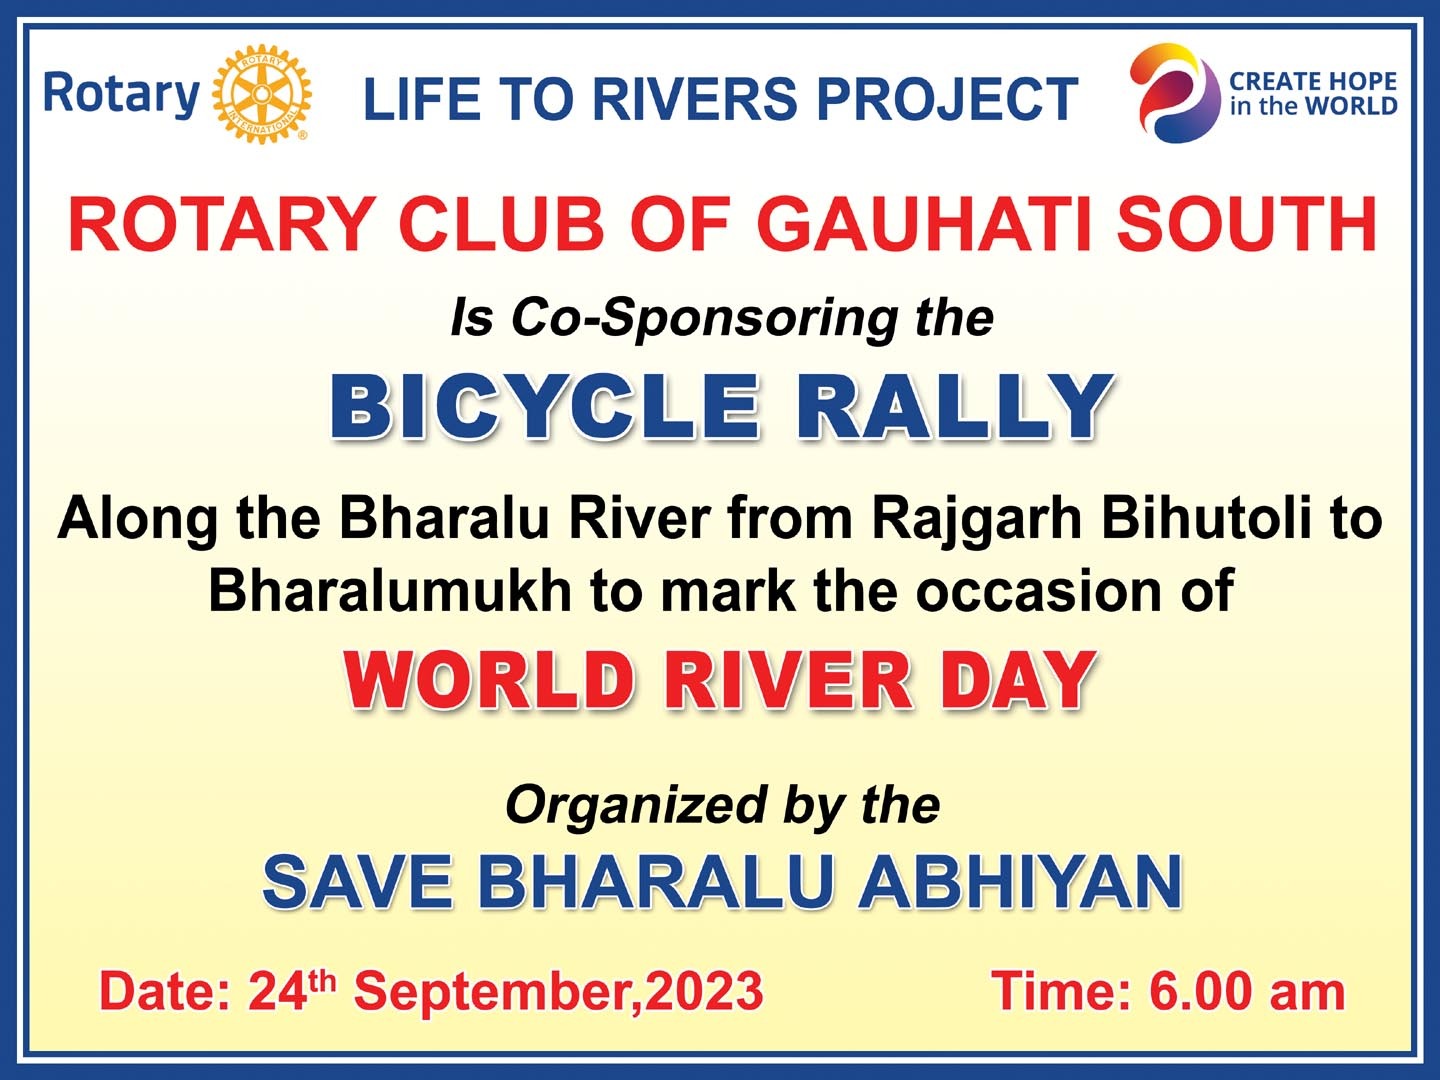 Bicycle Rally on World River Day